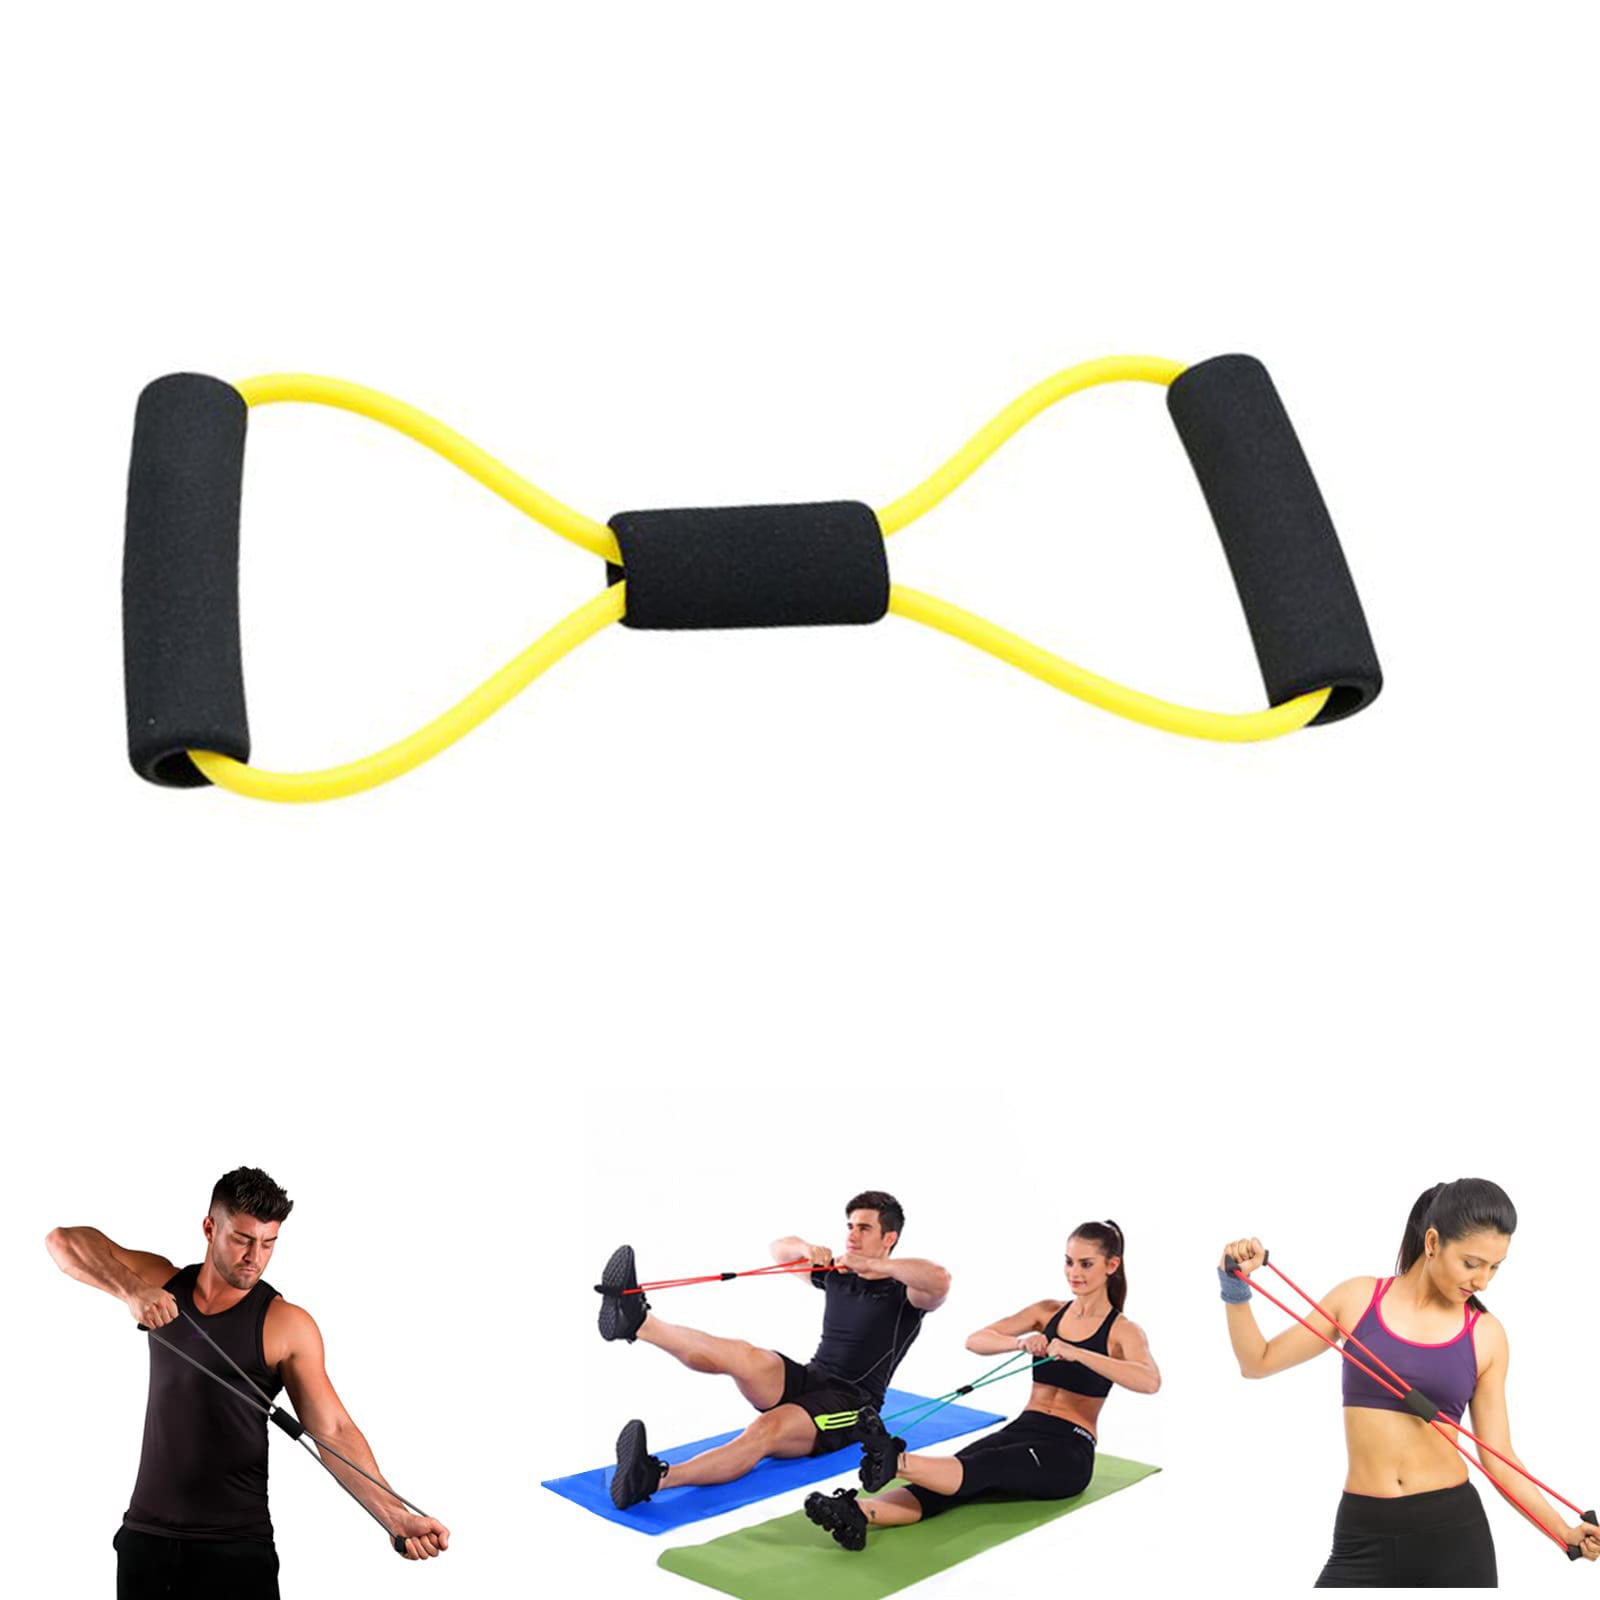 8 Resistance Band, Primary Fitness Exercise Working Out Cord for Women and  Men, Natural Latex Workout Training for Arms, Chest Expander, Yoga Gym,  Stretch Tubing to Keep Figure 